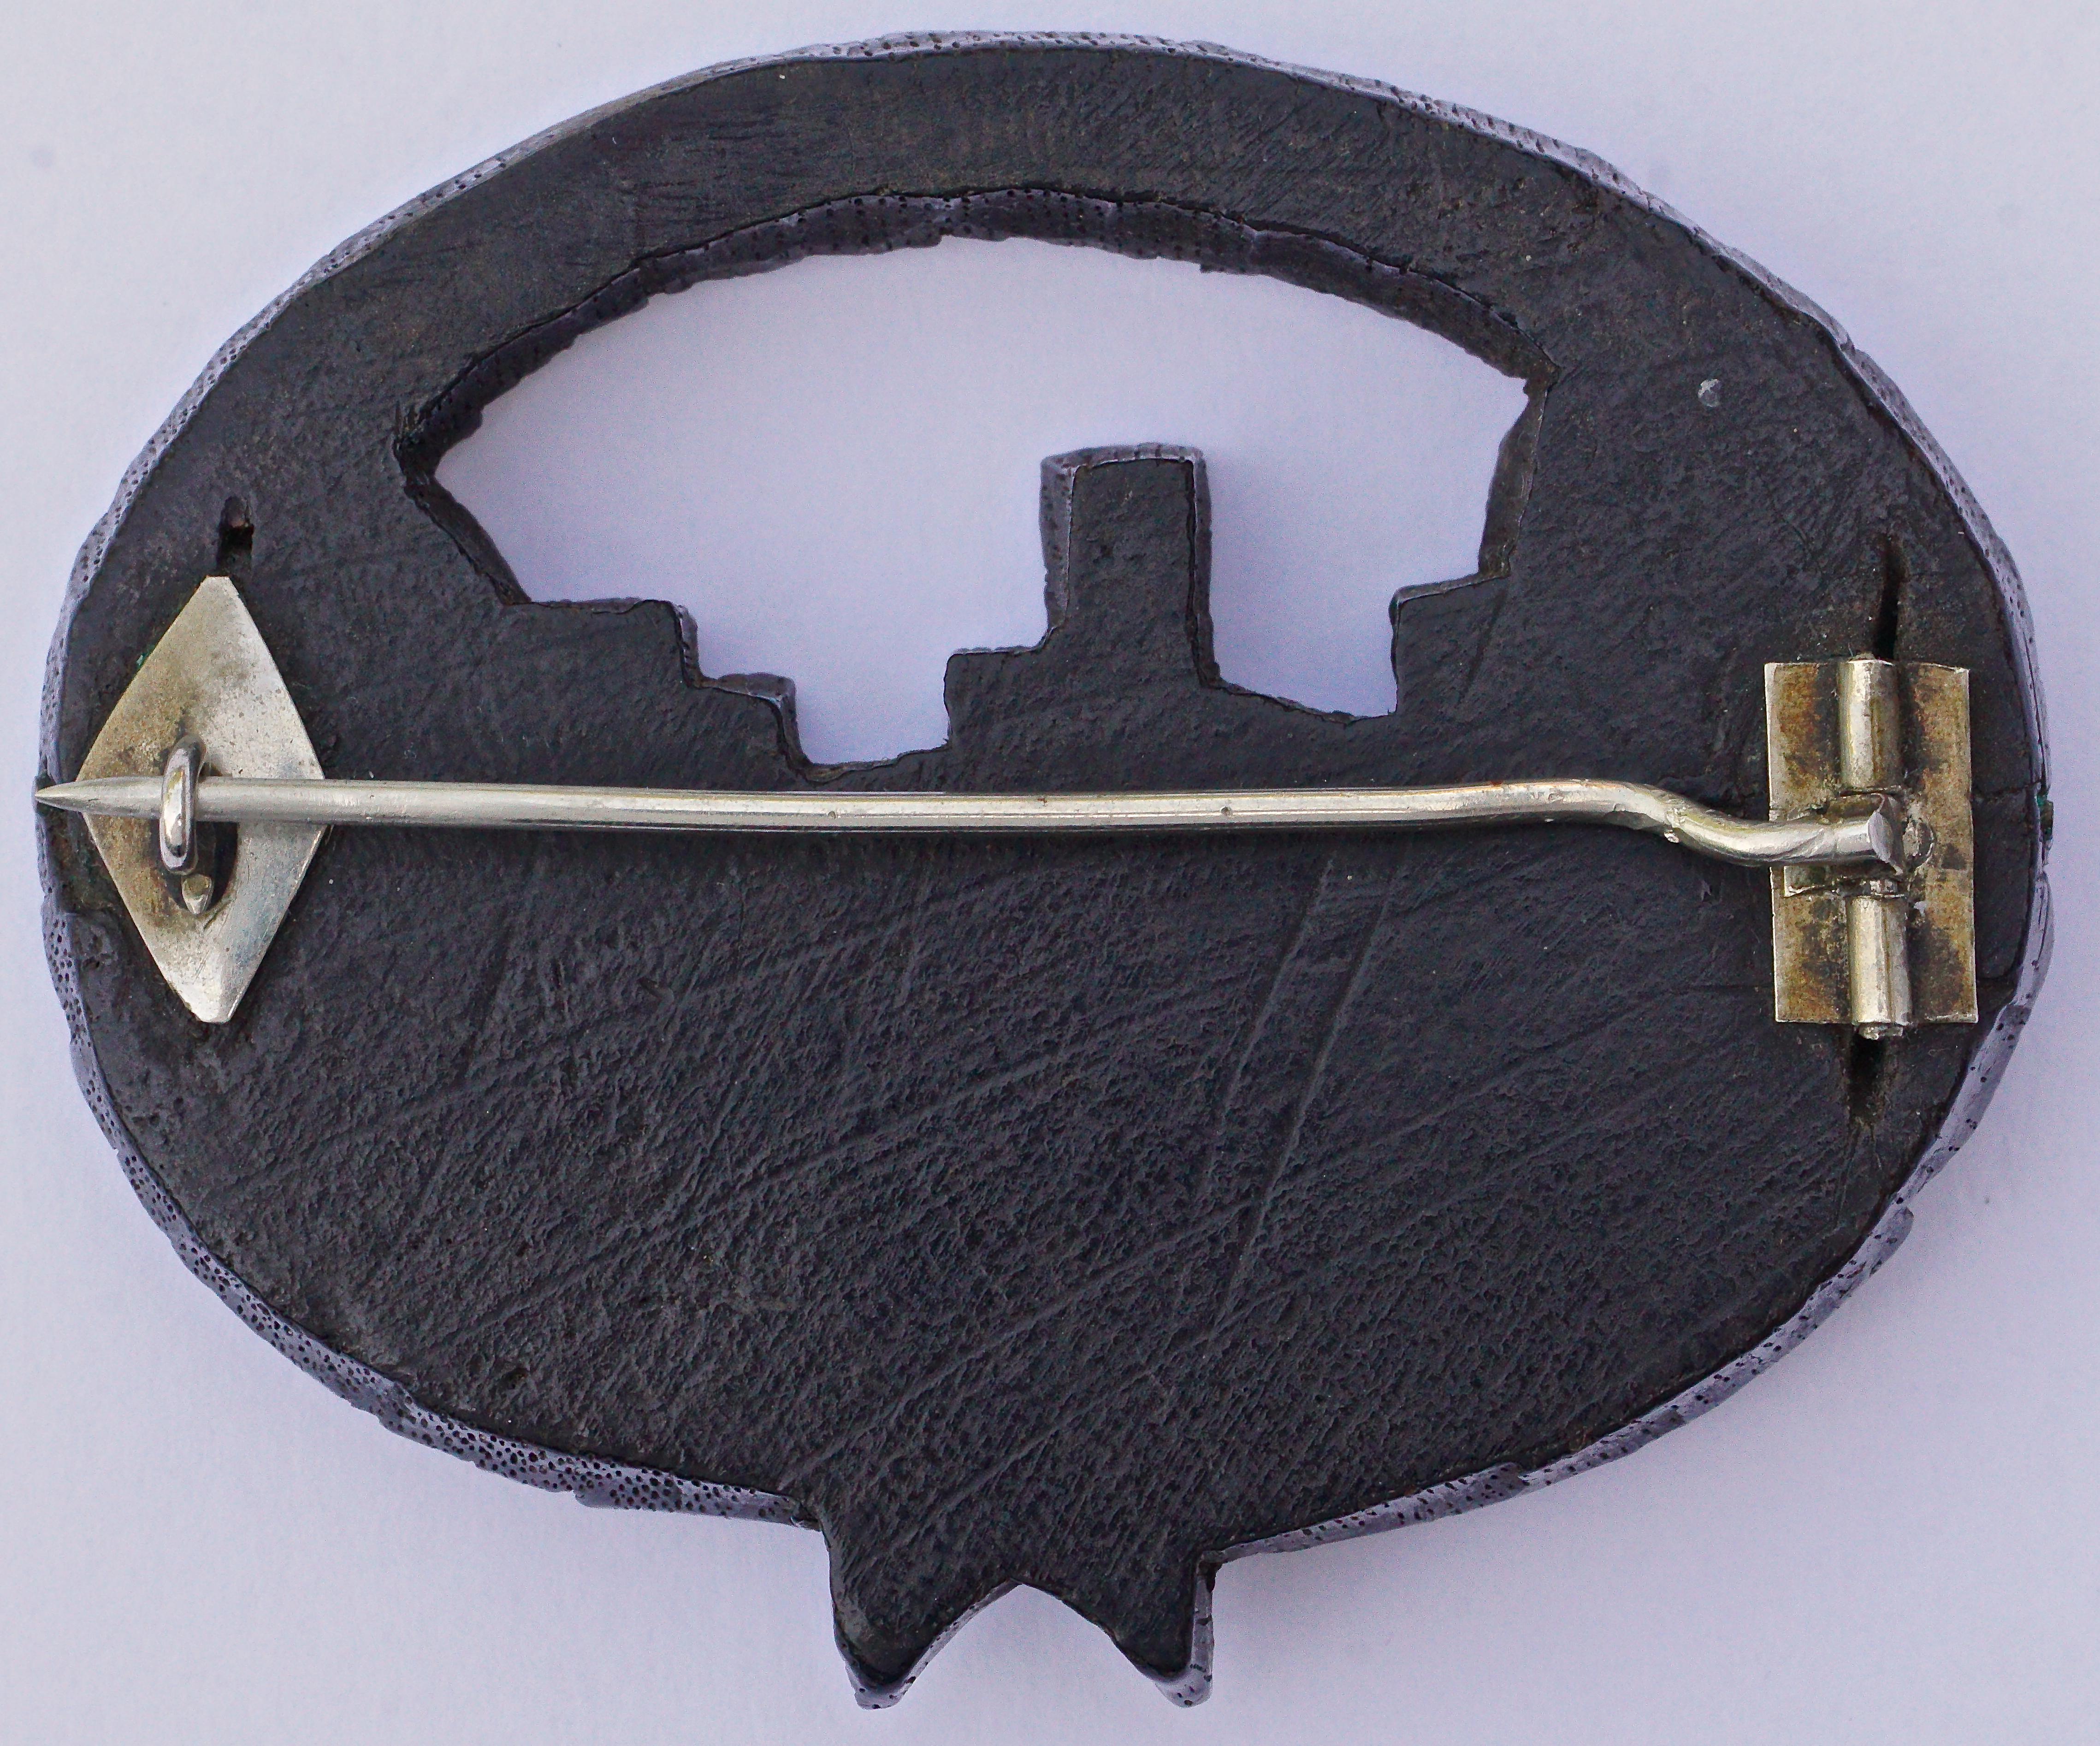 Victorian hand carved Irish bog oak brooch featuring a castle in bas relief encircled by a garland of leaves. It has the old 'C' hook clasp and tube pin assembly in silver tone metal, which dates this lovely antique brooch to around 1890. The tube